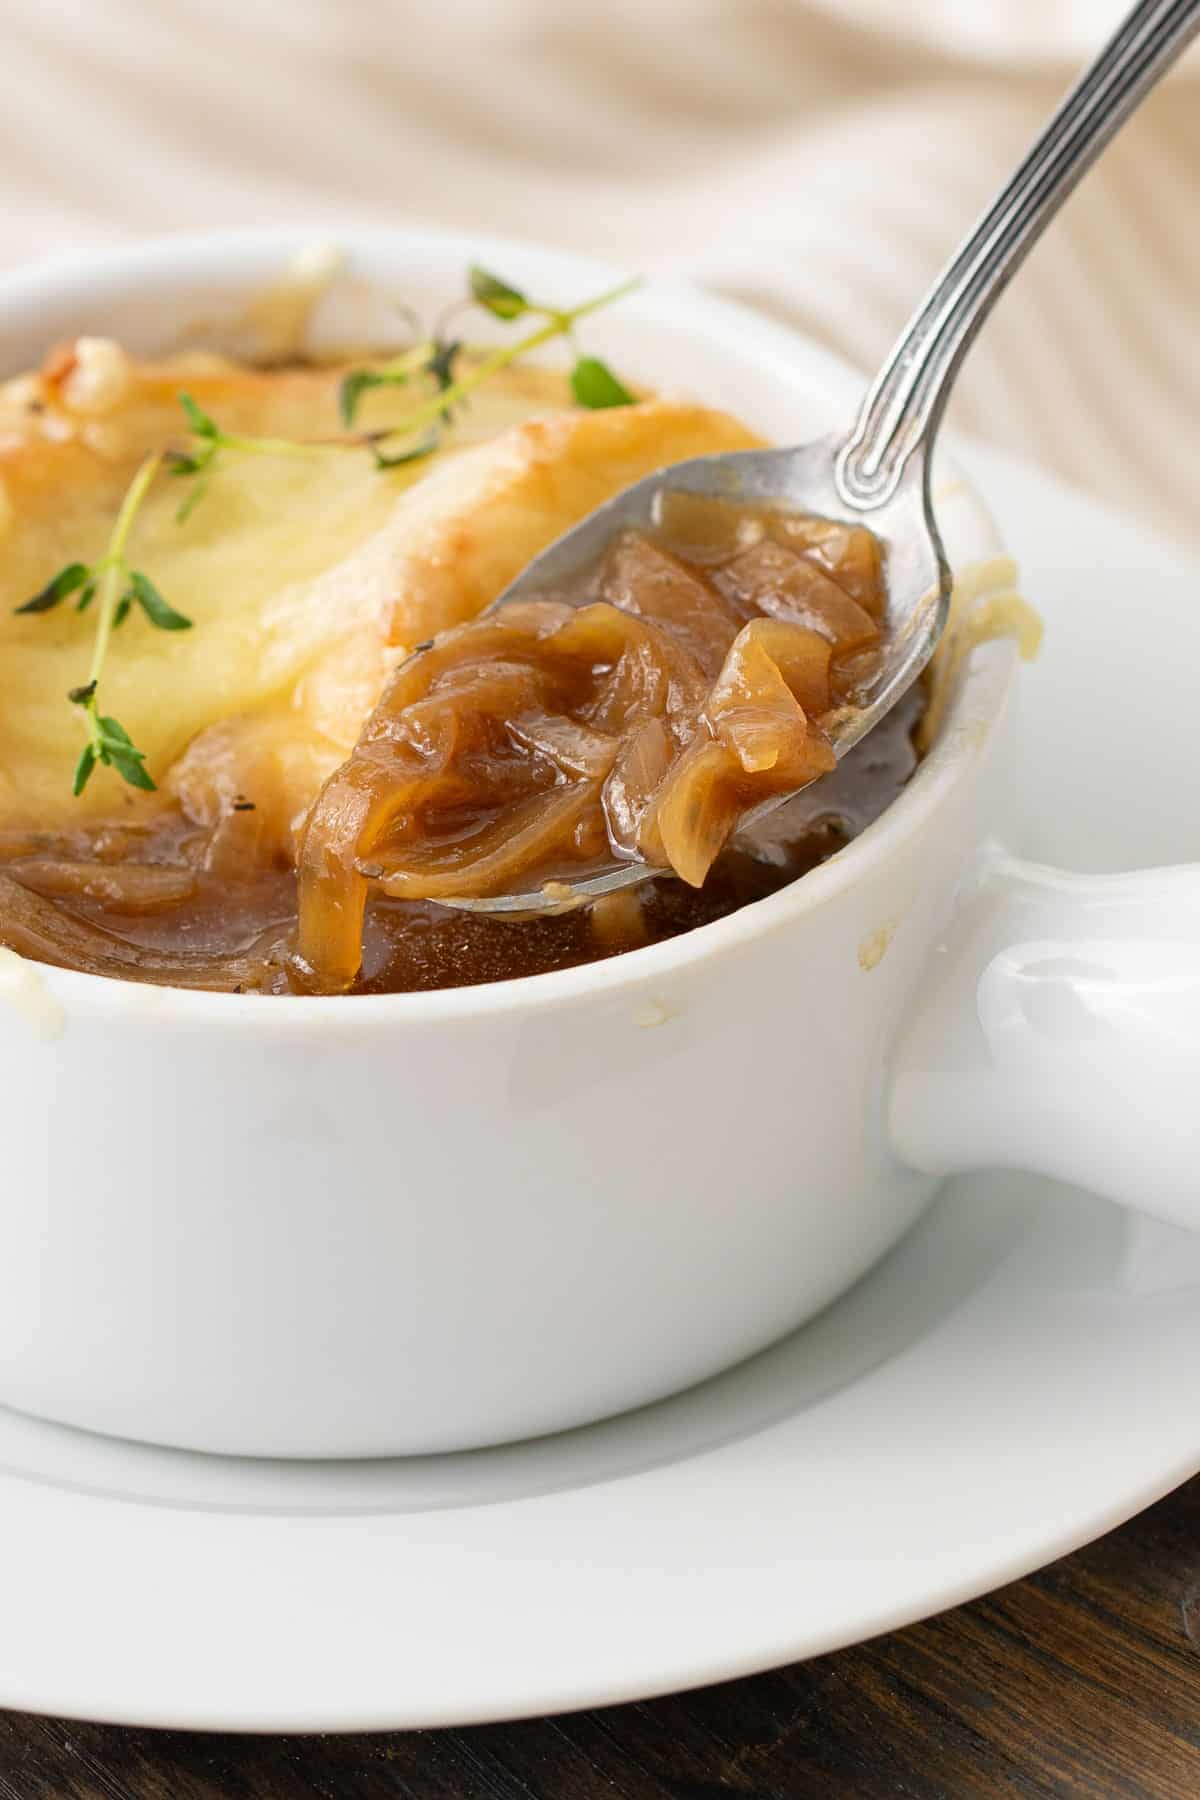 Close up view of a spoon being removed from a bowl of French onion soup.